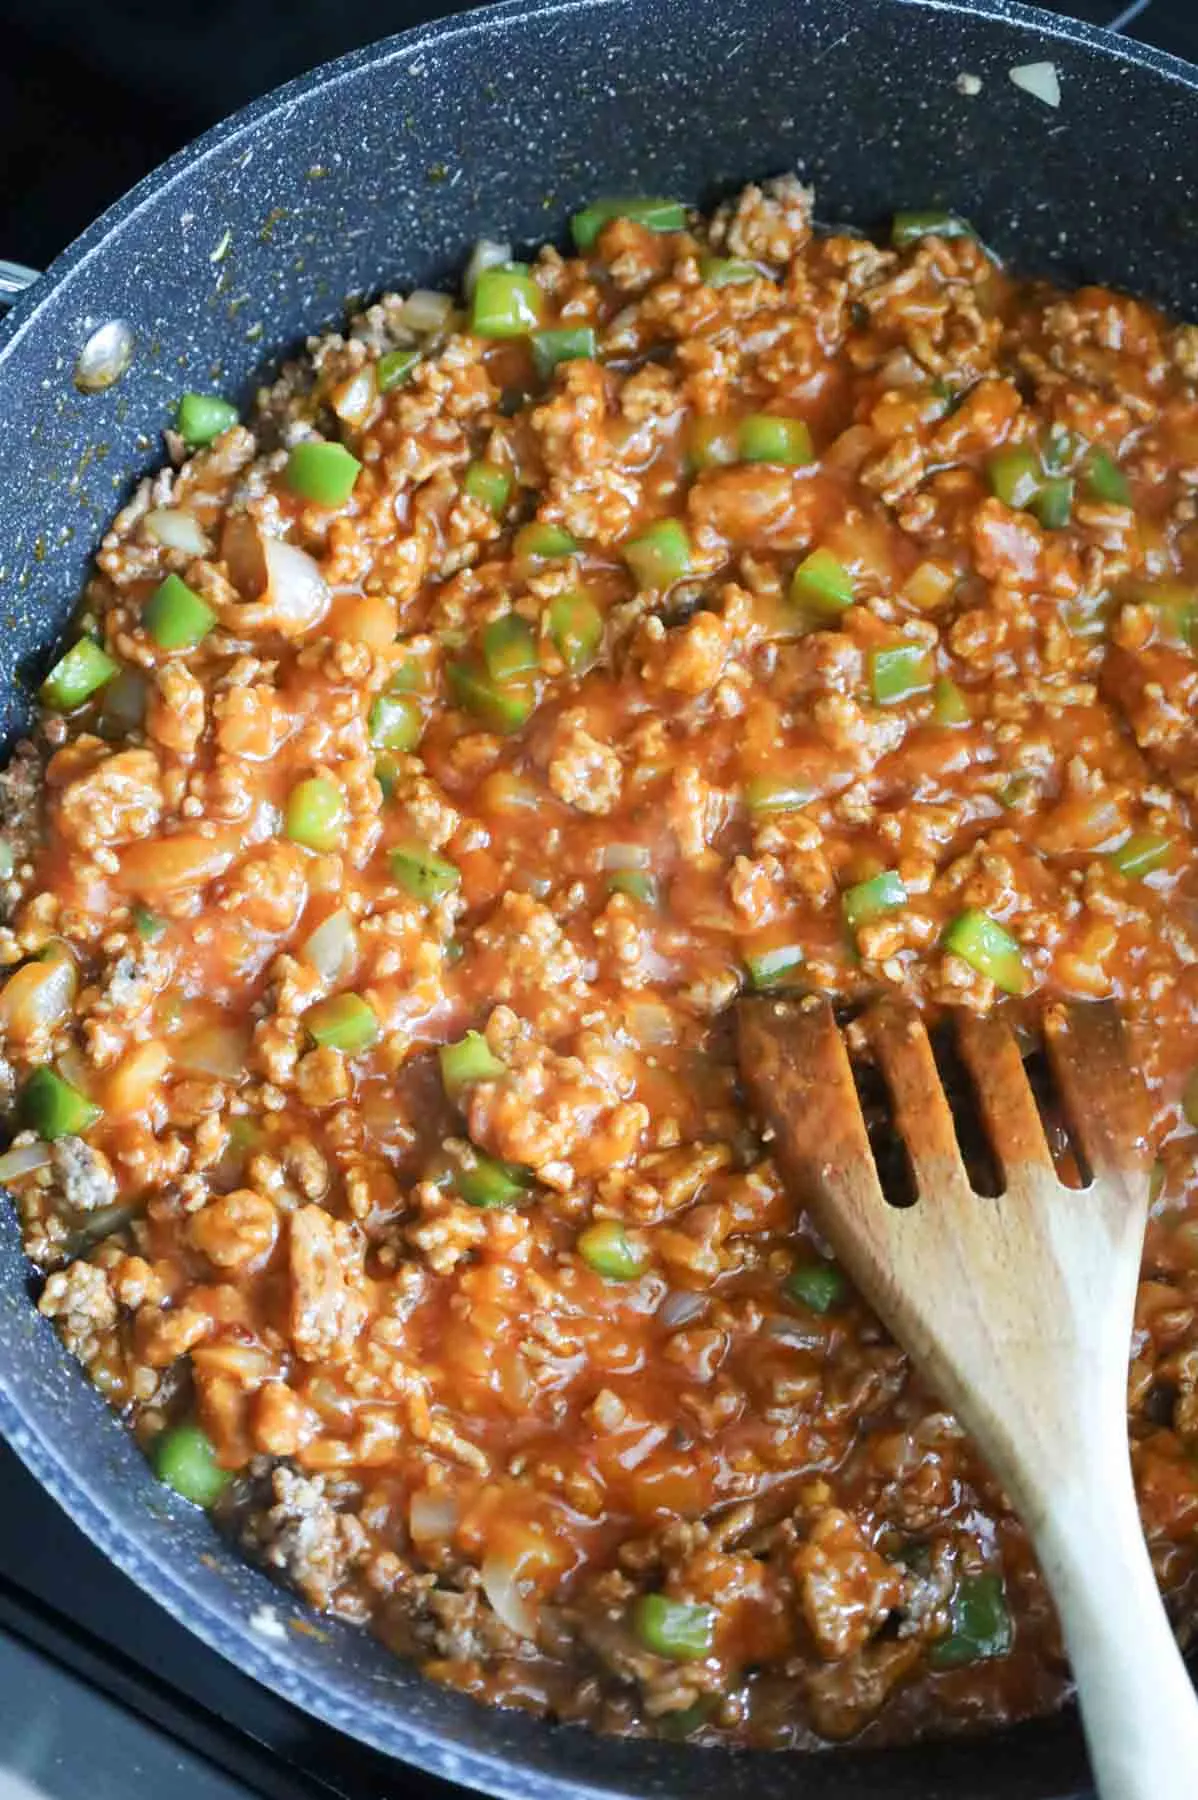 tomato soup, ground beef, diced onions and peppers mixture in a skillet